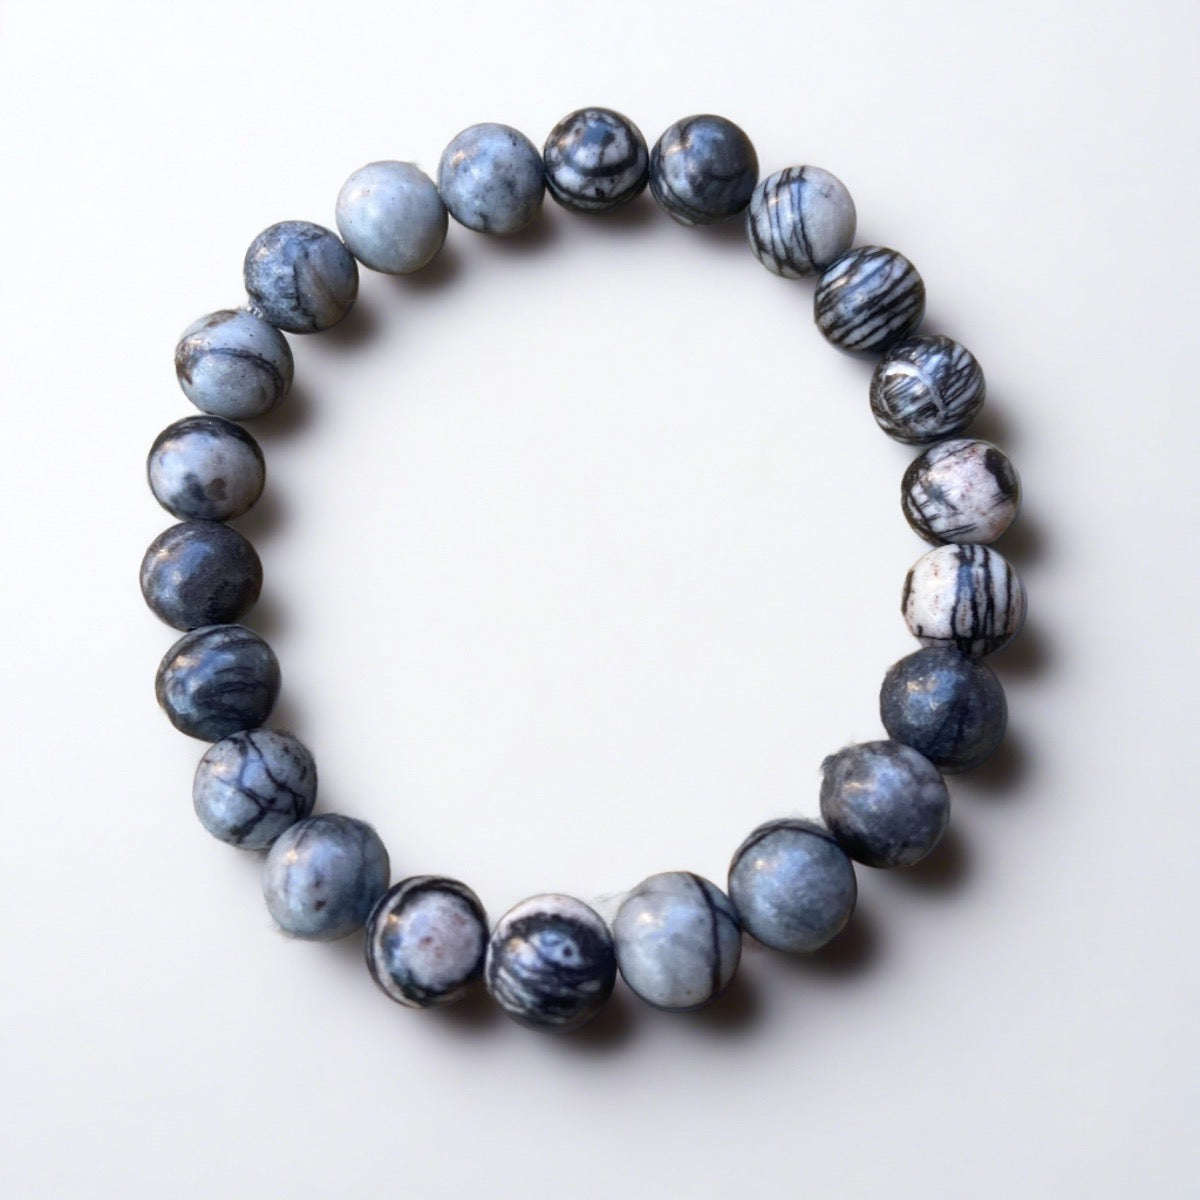 Unique Black Water Jasper Bracelet made with authentic stones on a gray background, a stunning piece of unusual mindfulness jewelry